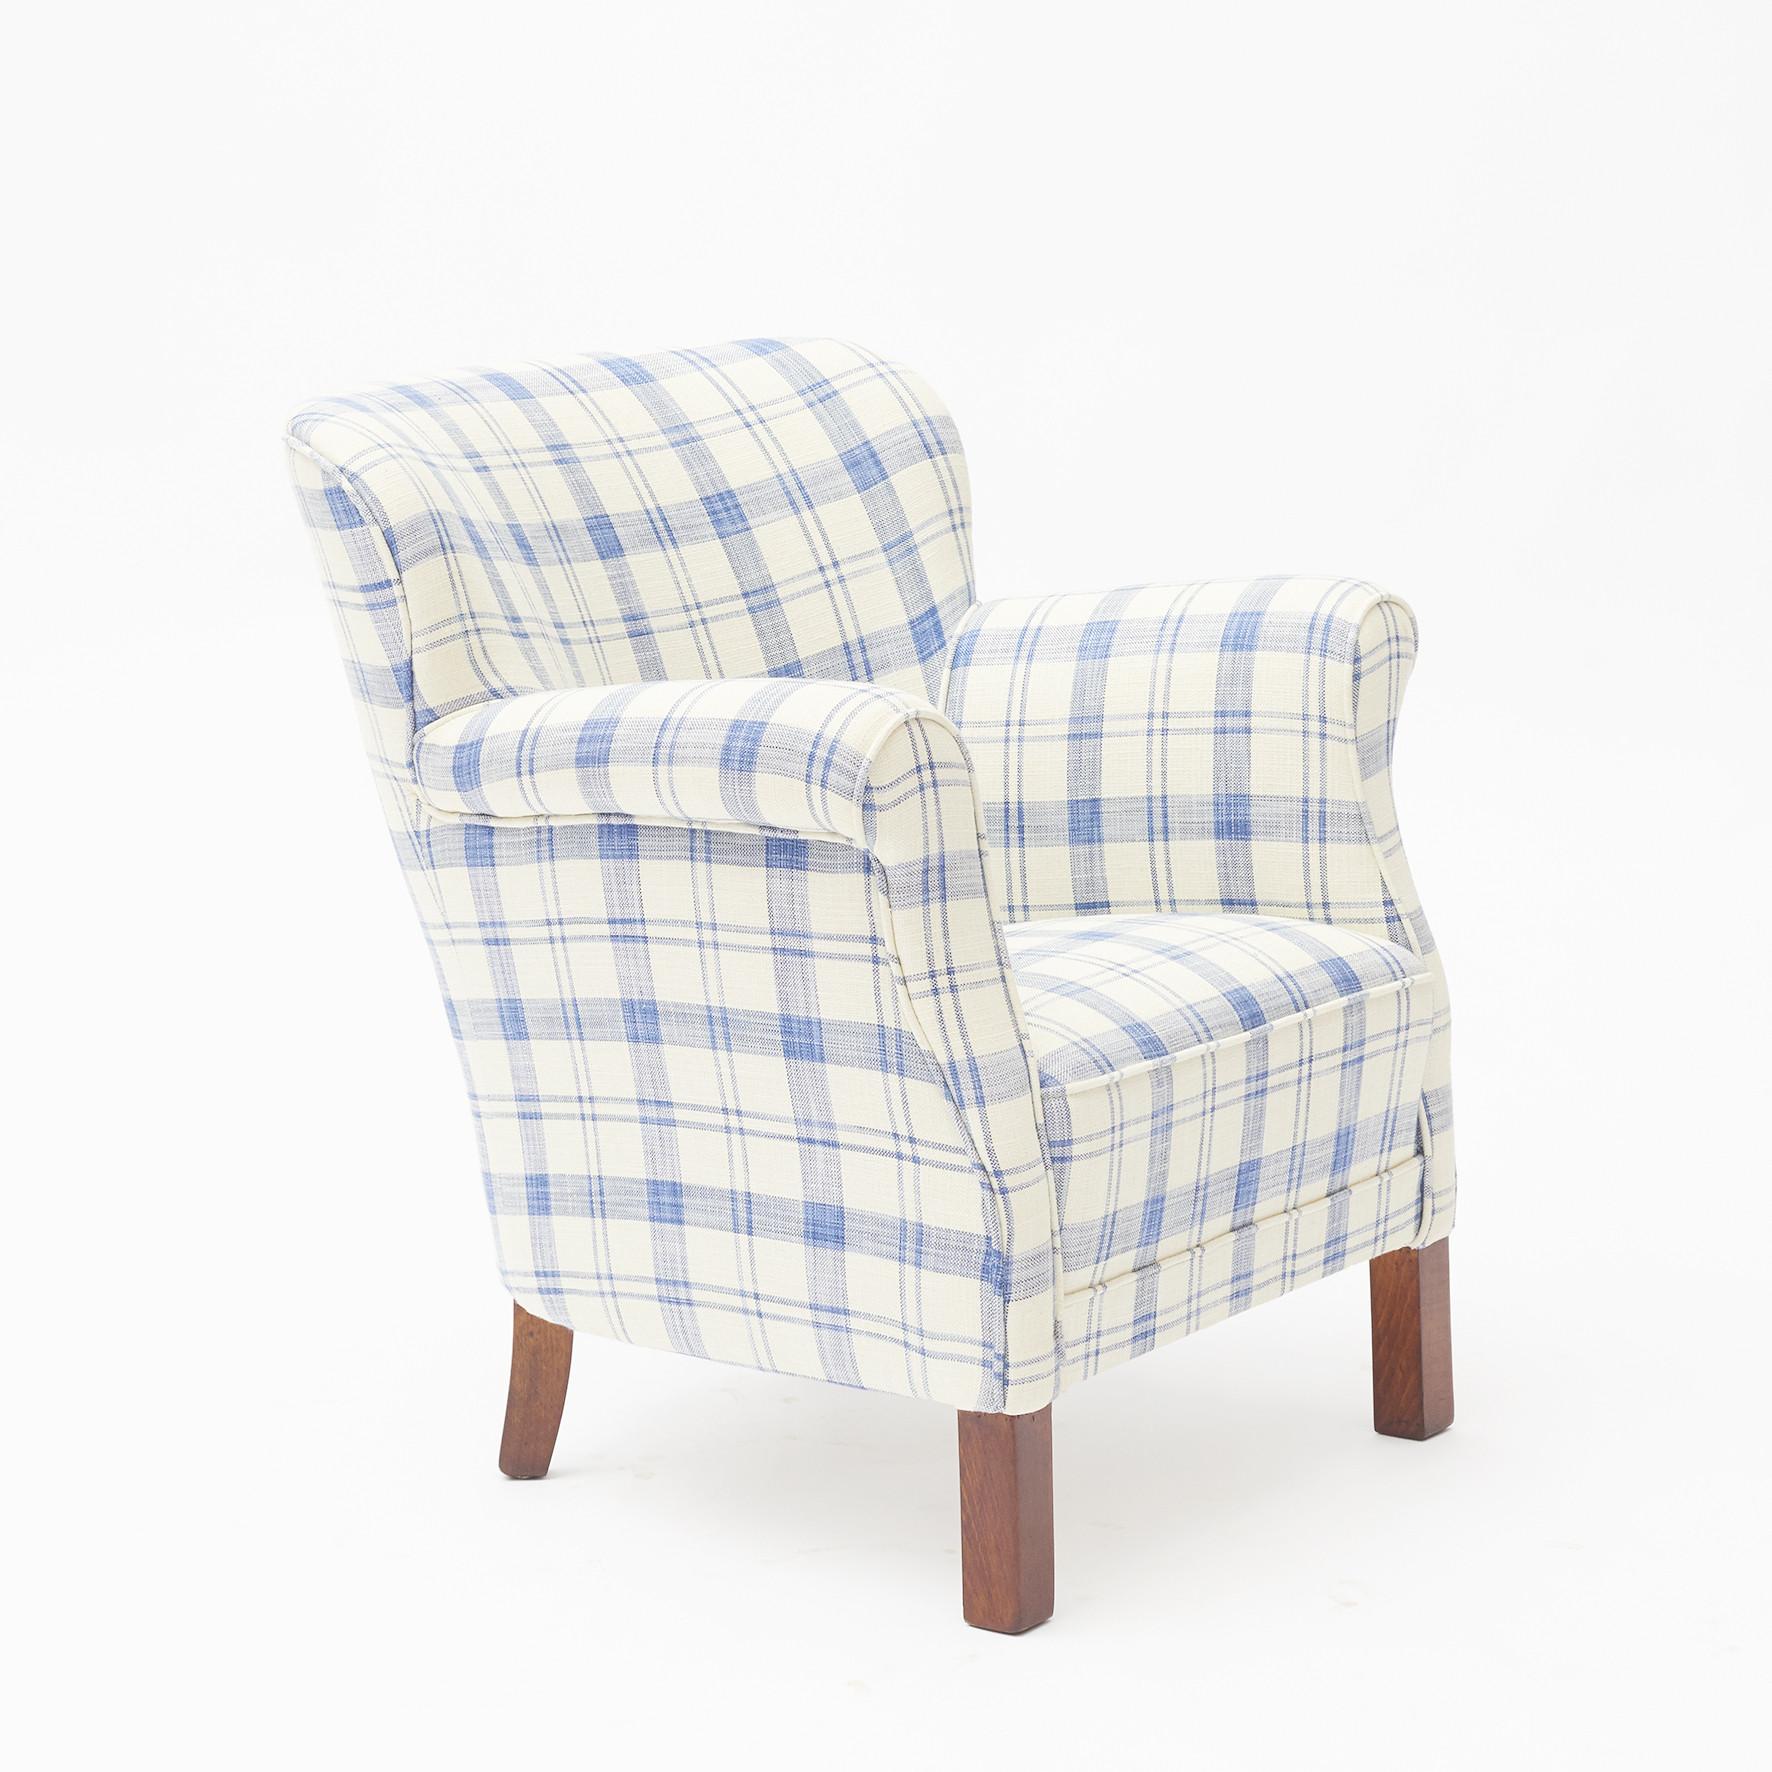 Pair of Danish armchairs, 1940-1950.
Dark polished beechwood frame and coil springs in the seat.
Newly upholstered in a blue and white checkered pattern fabric from 